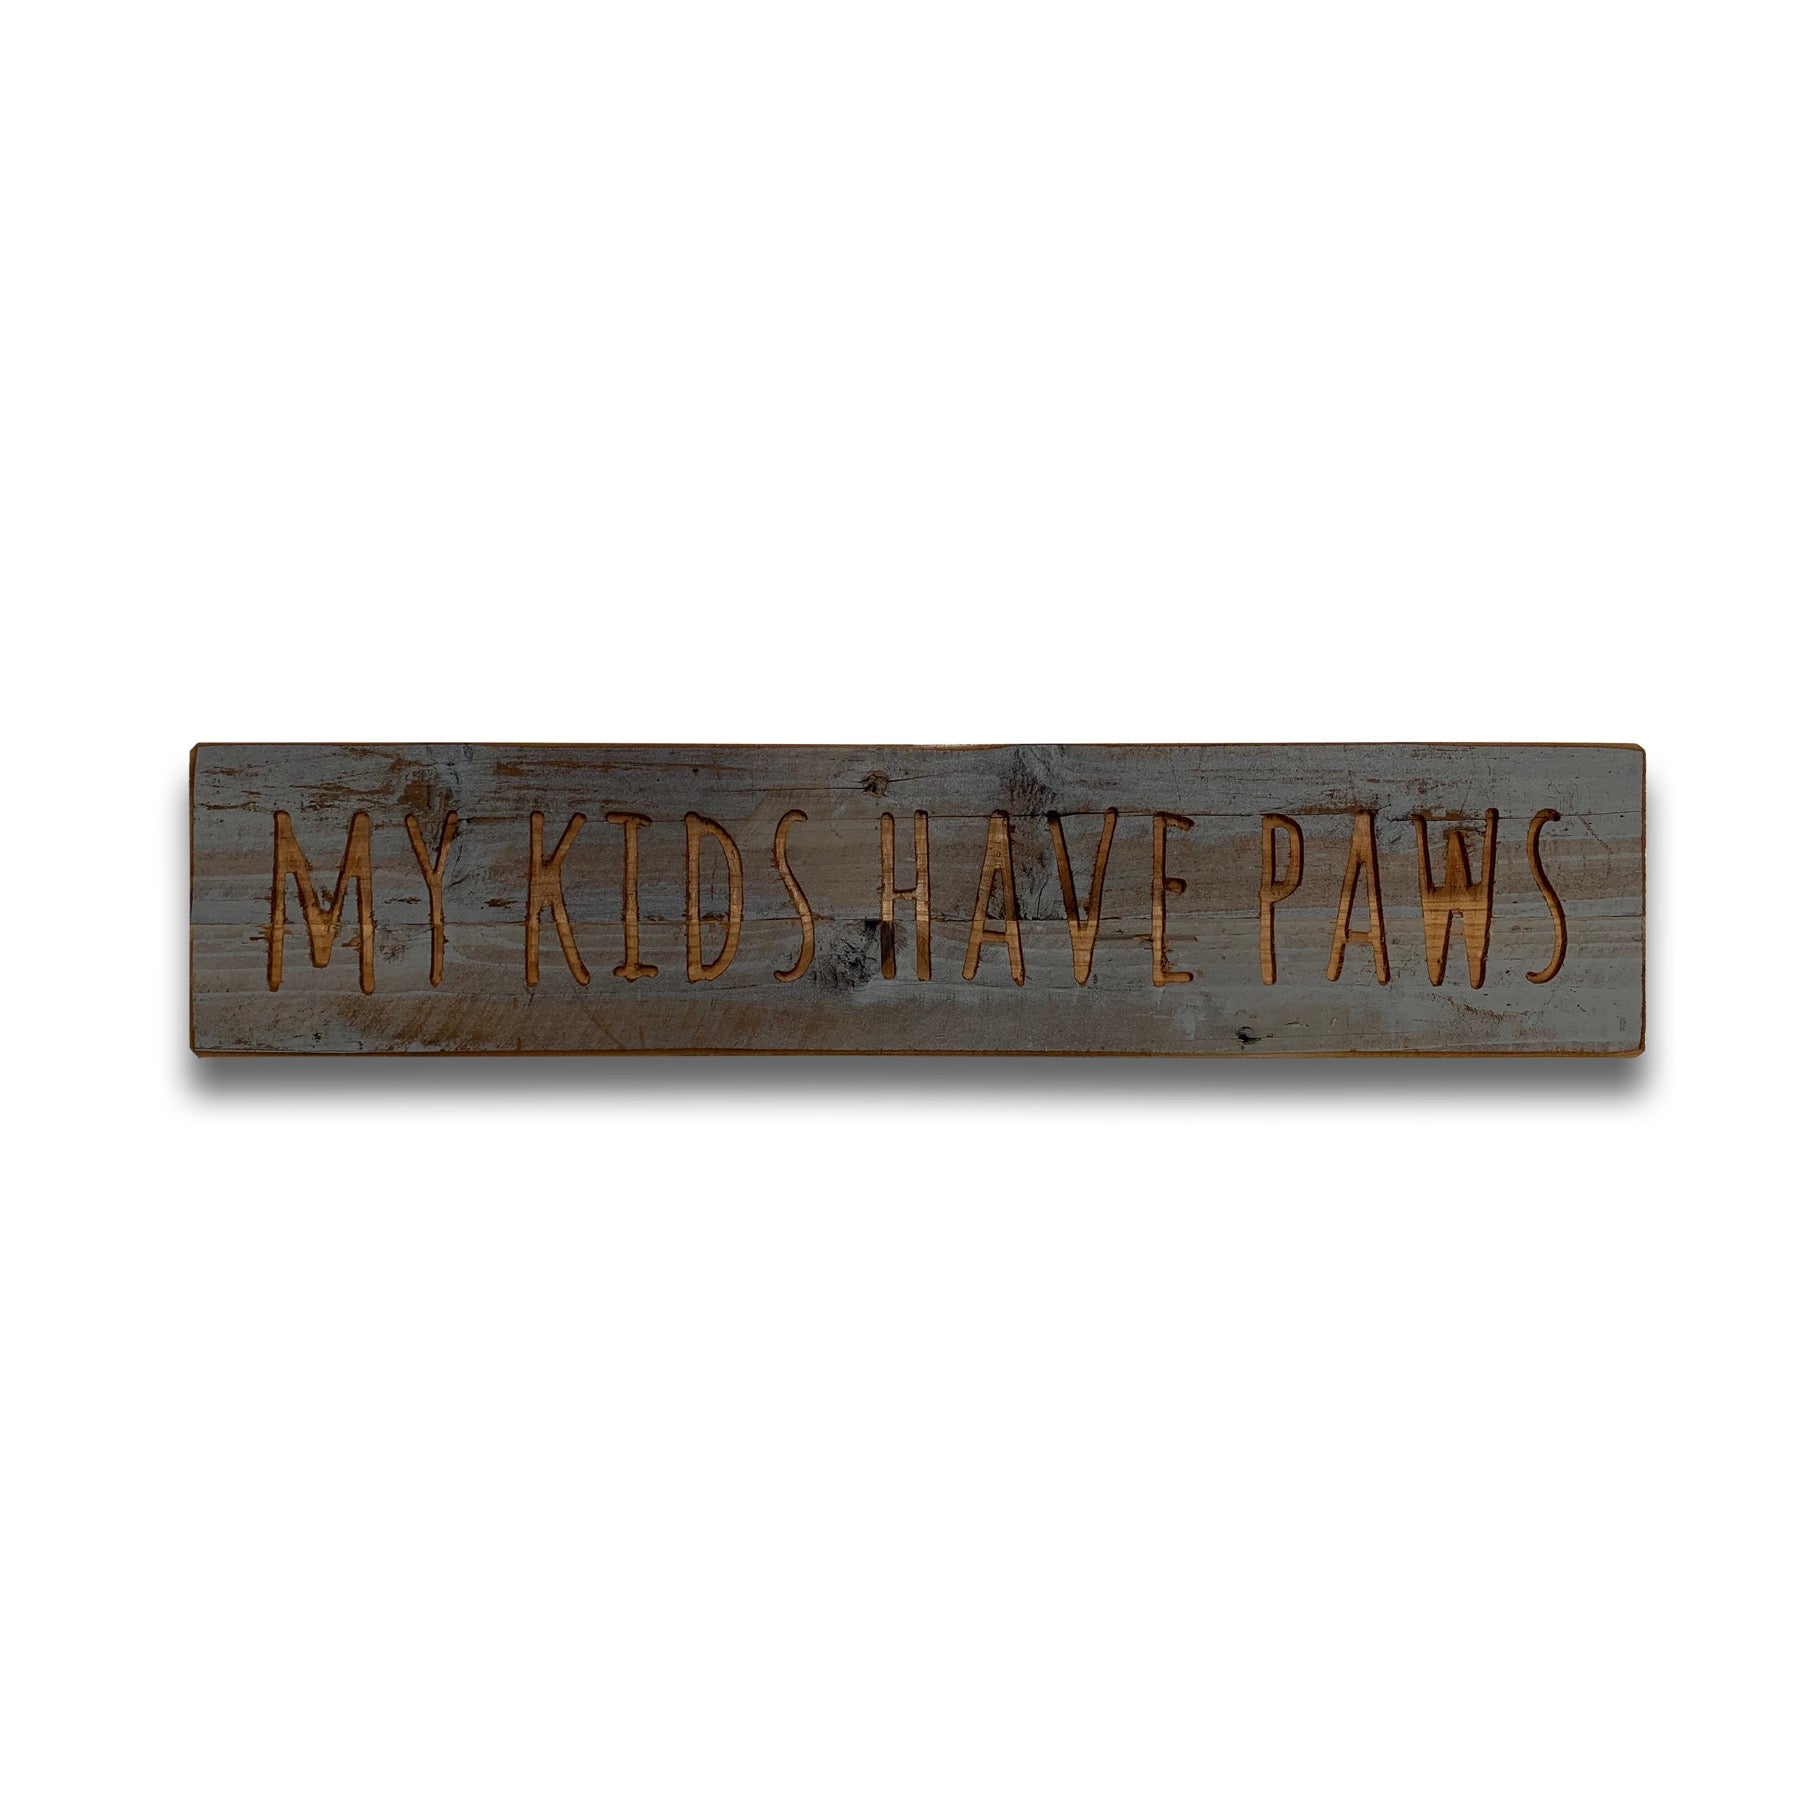 Kids Have Paws Grey Wash Wooden Message Plaque